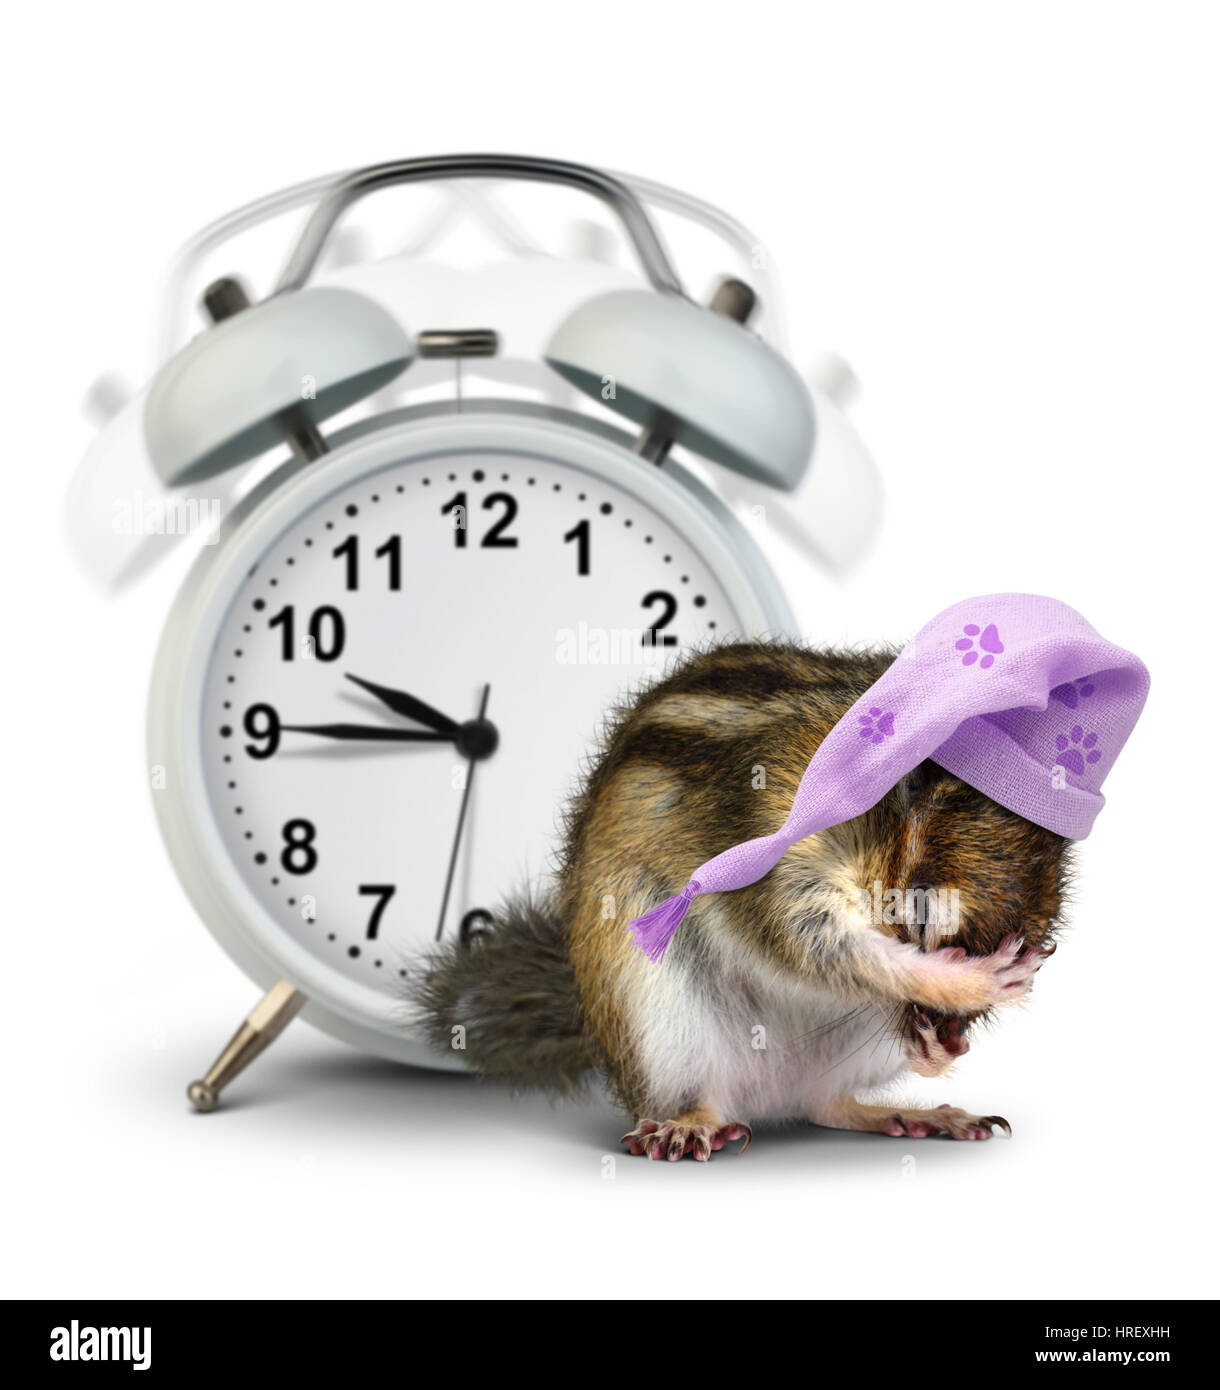 good morning concept, Funny animal chipmunk with ringing clock and sleeping hat Stock Photo